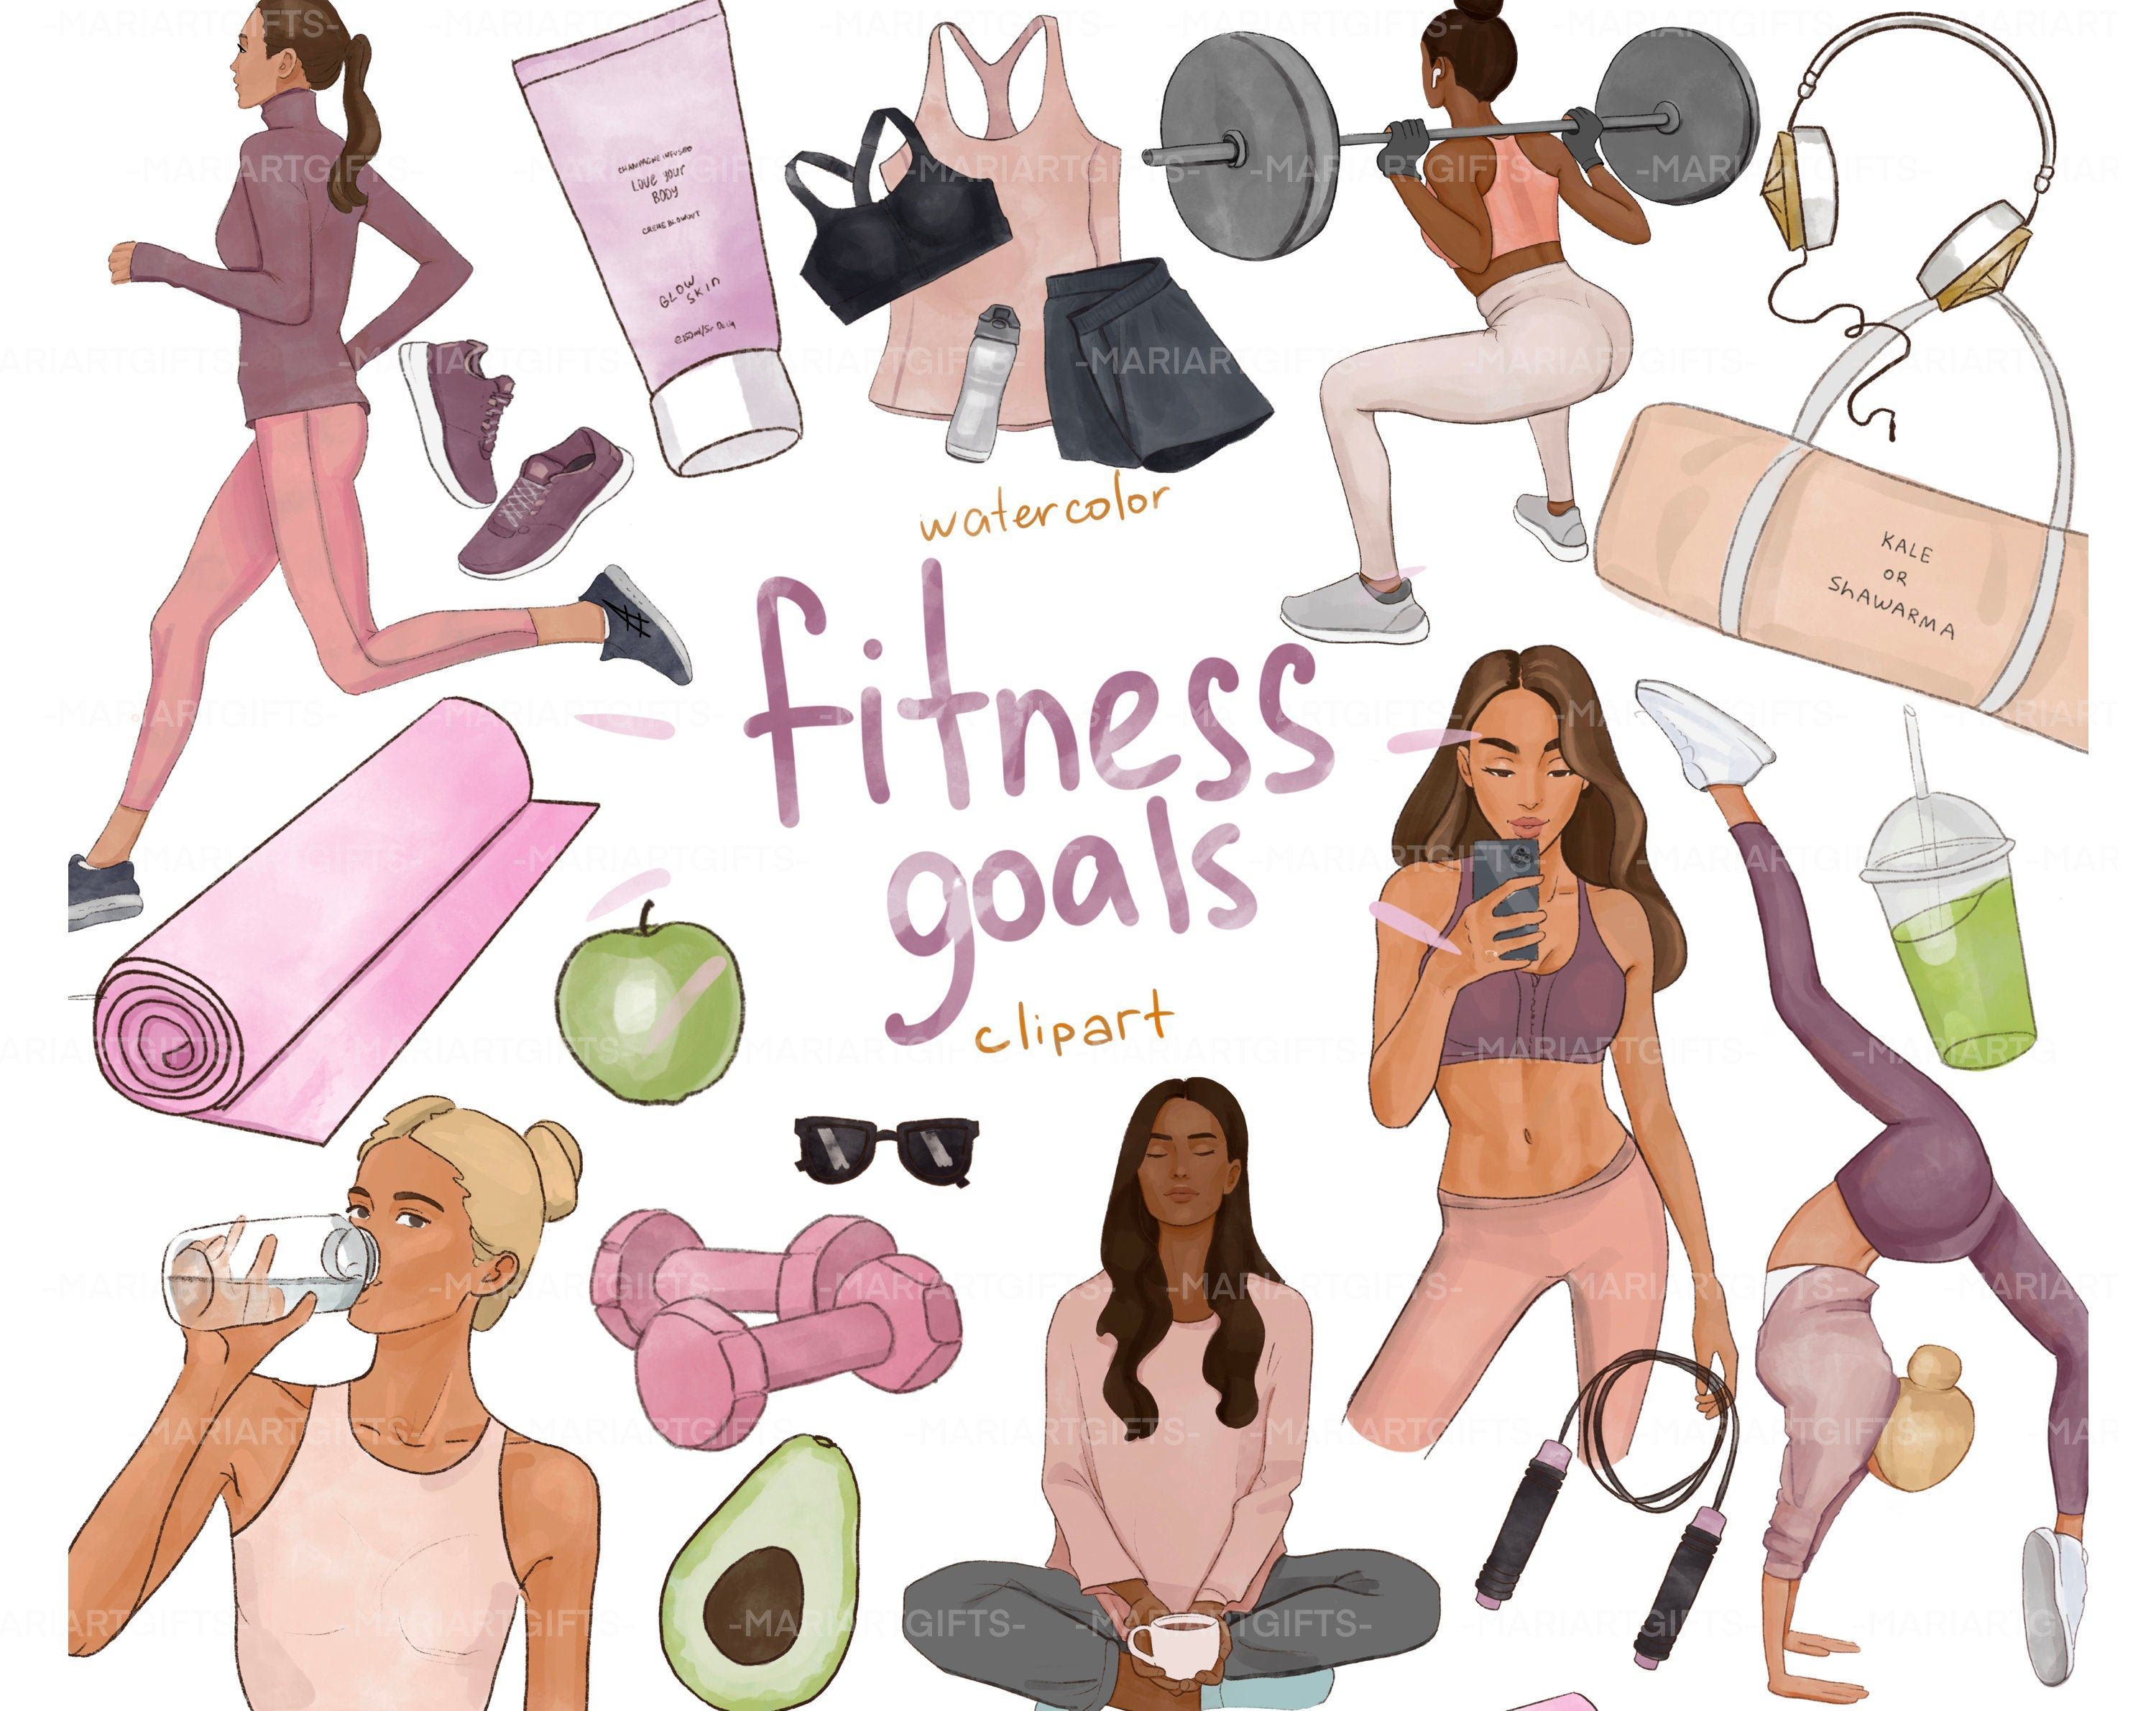 Fitness Clipart, Workout Clip Art, Yoga Clip Art, Fashion Illustration, Gym Equipment, gym clipart, fitness blogger, planner stickers - Fitness Clipart, Workout Clip Art, Yoga Clip Art, Fashion Illustration, Gym Equipment, gym clipart, fitness blogger, planner stickers -   fitness Illustration wallpaper